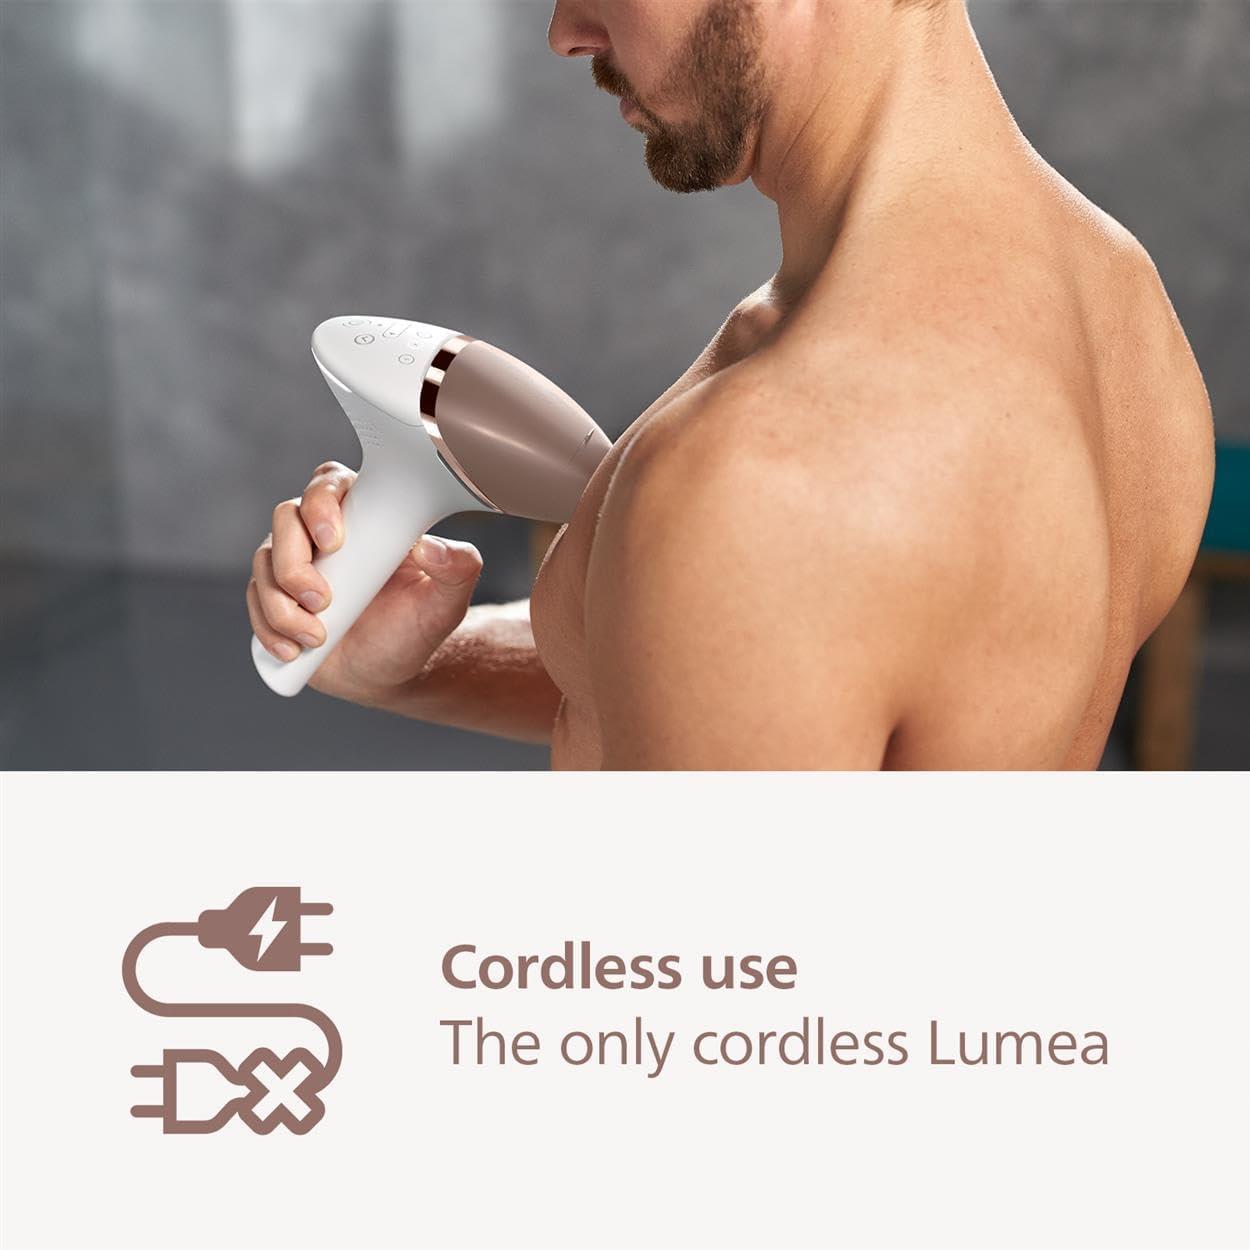 See What Comes in the Box with the Lumea IPL Series 9000 Philips